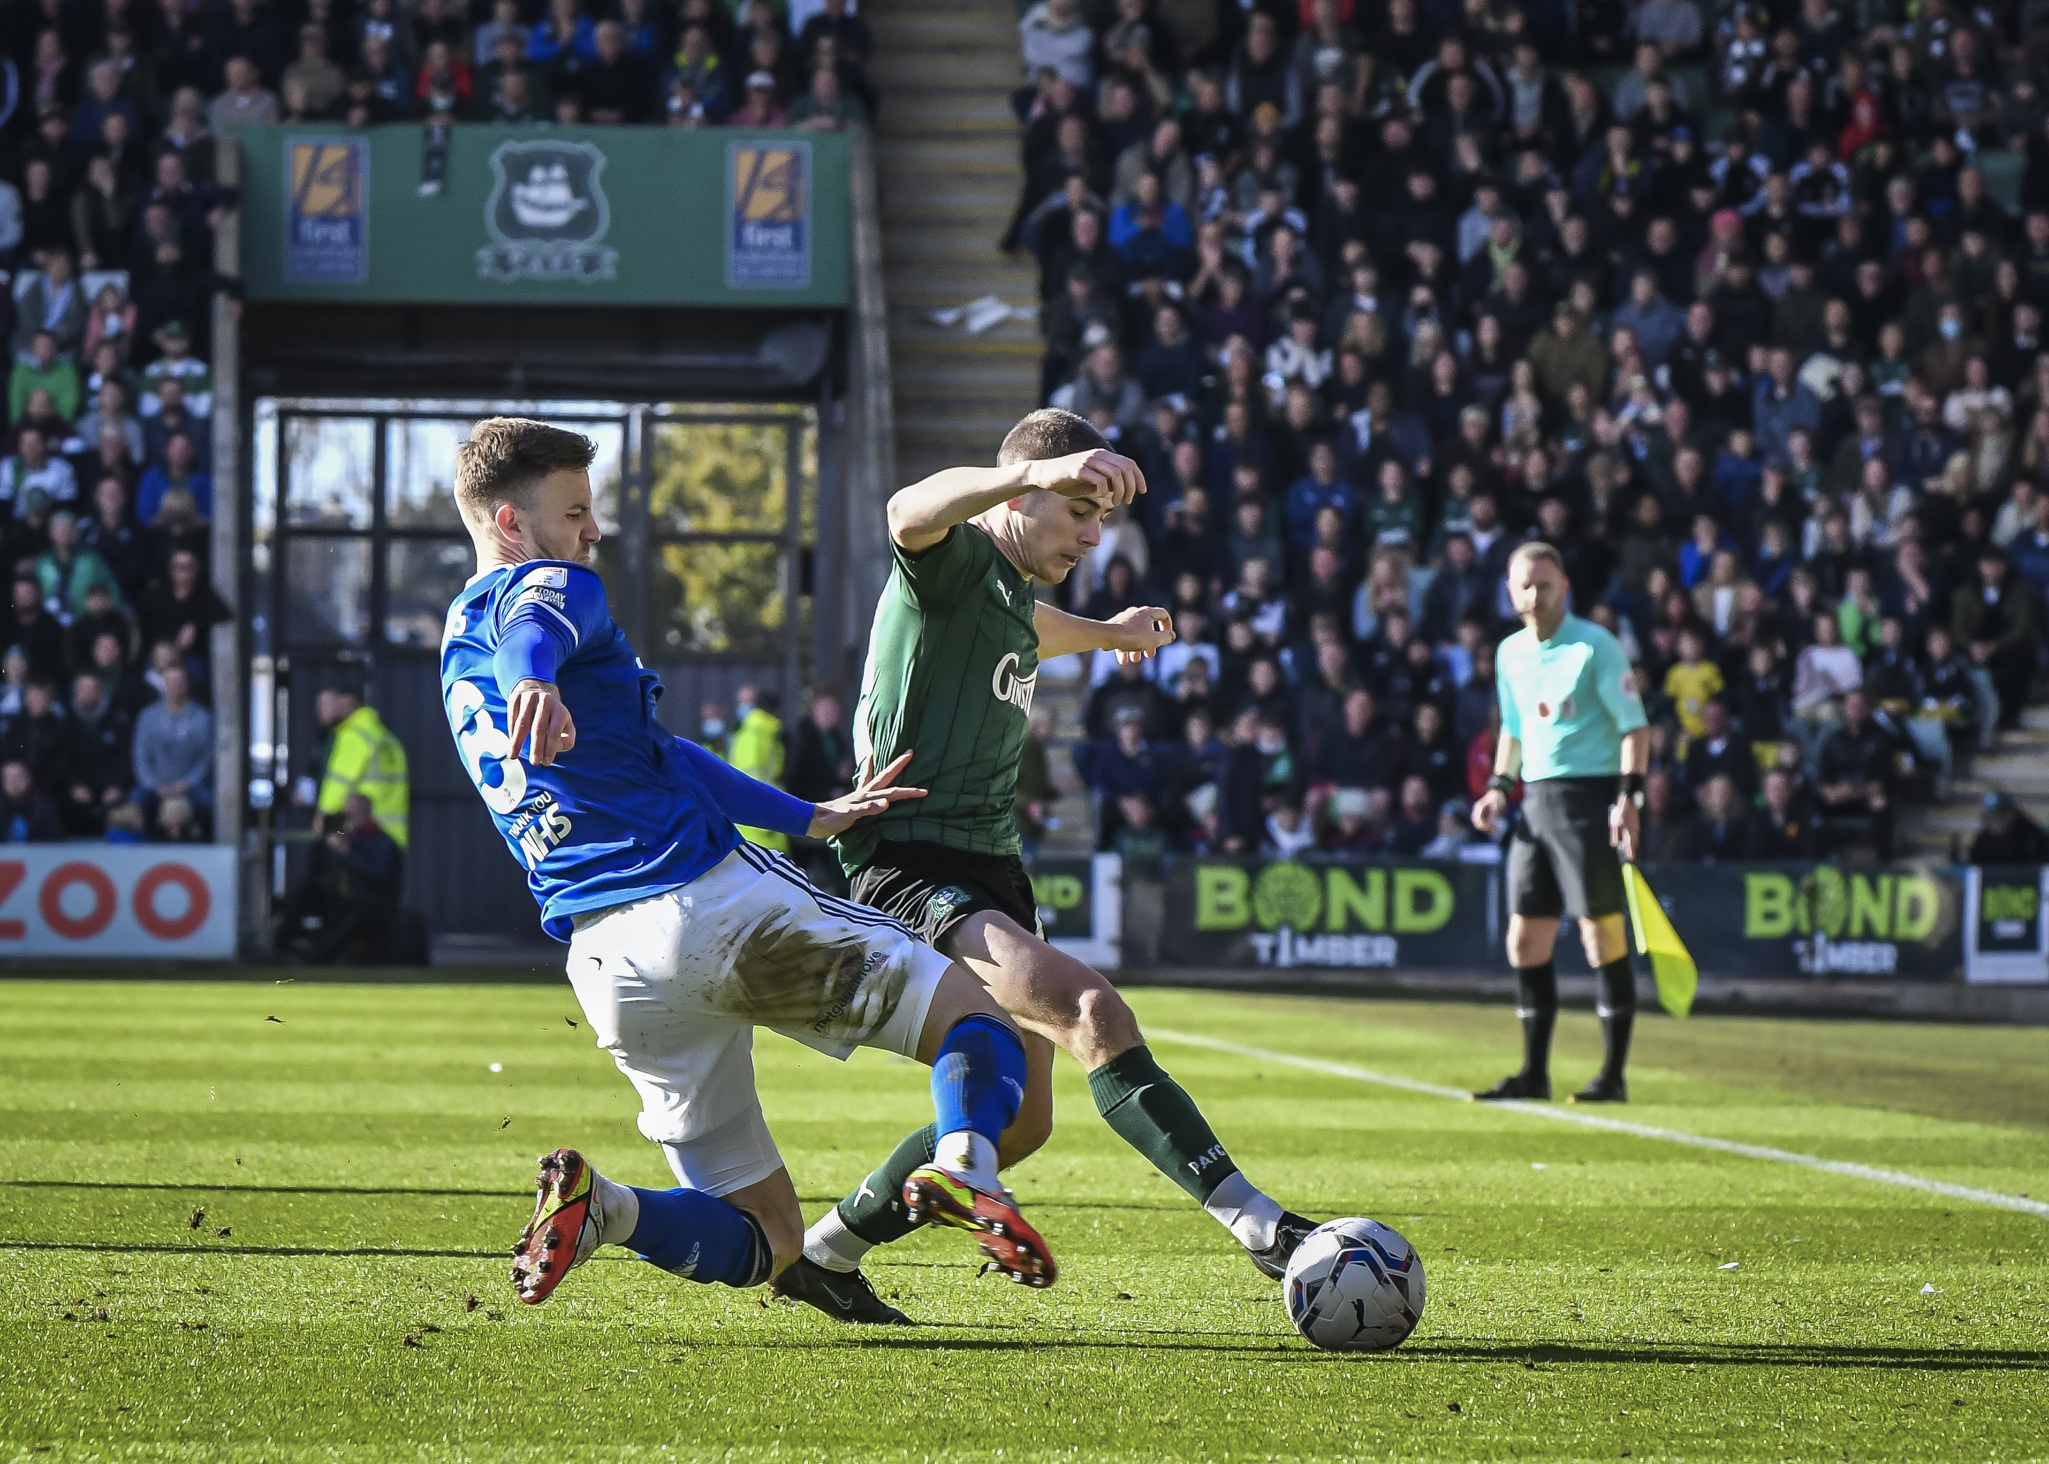 Action from Argyle v Ipswich Town